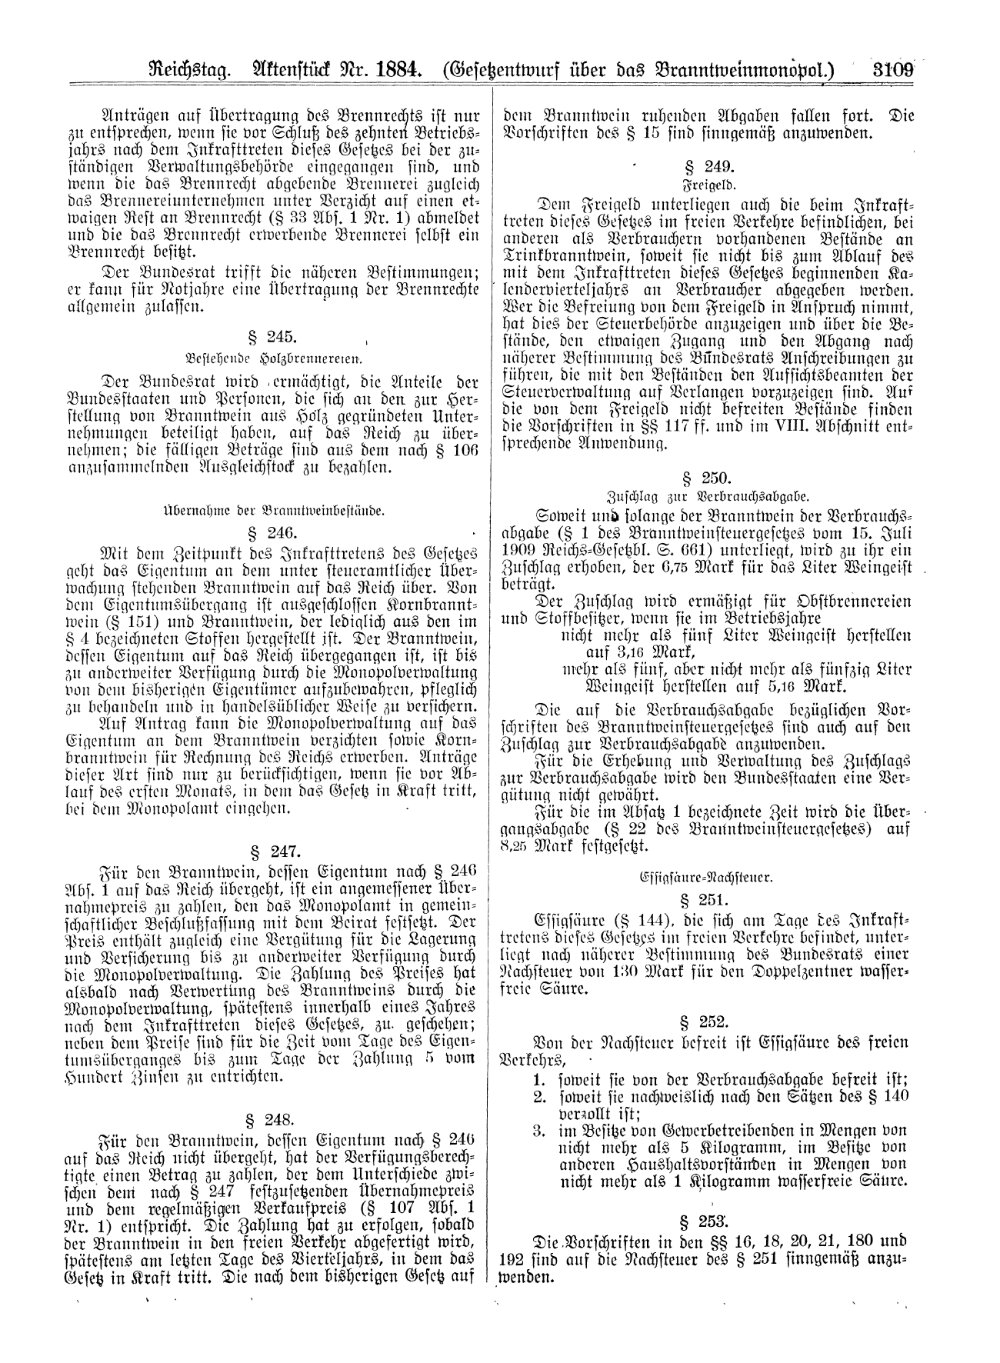 Scan of page 3109